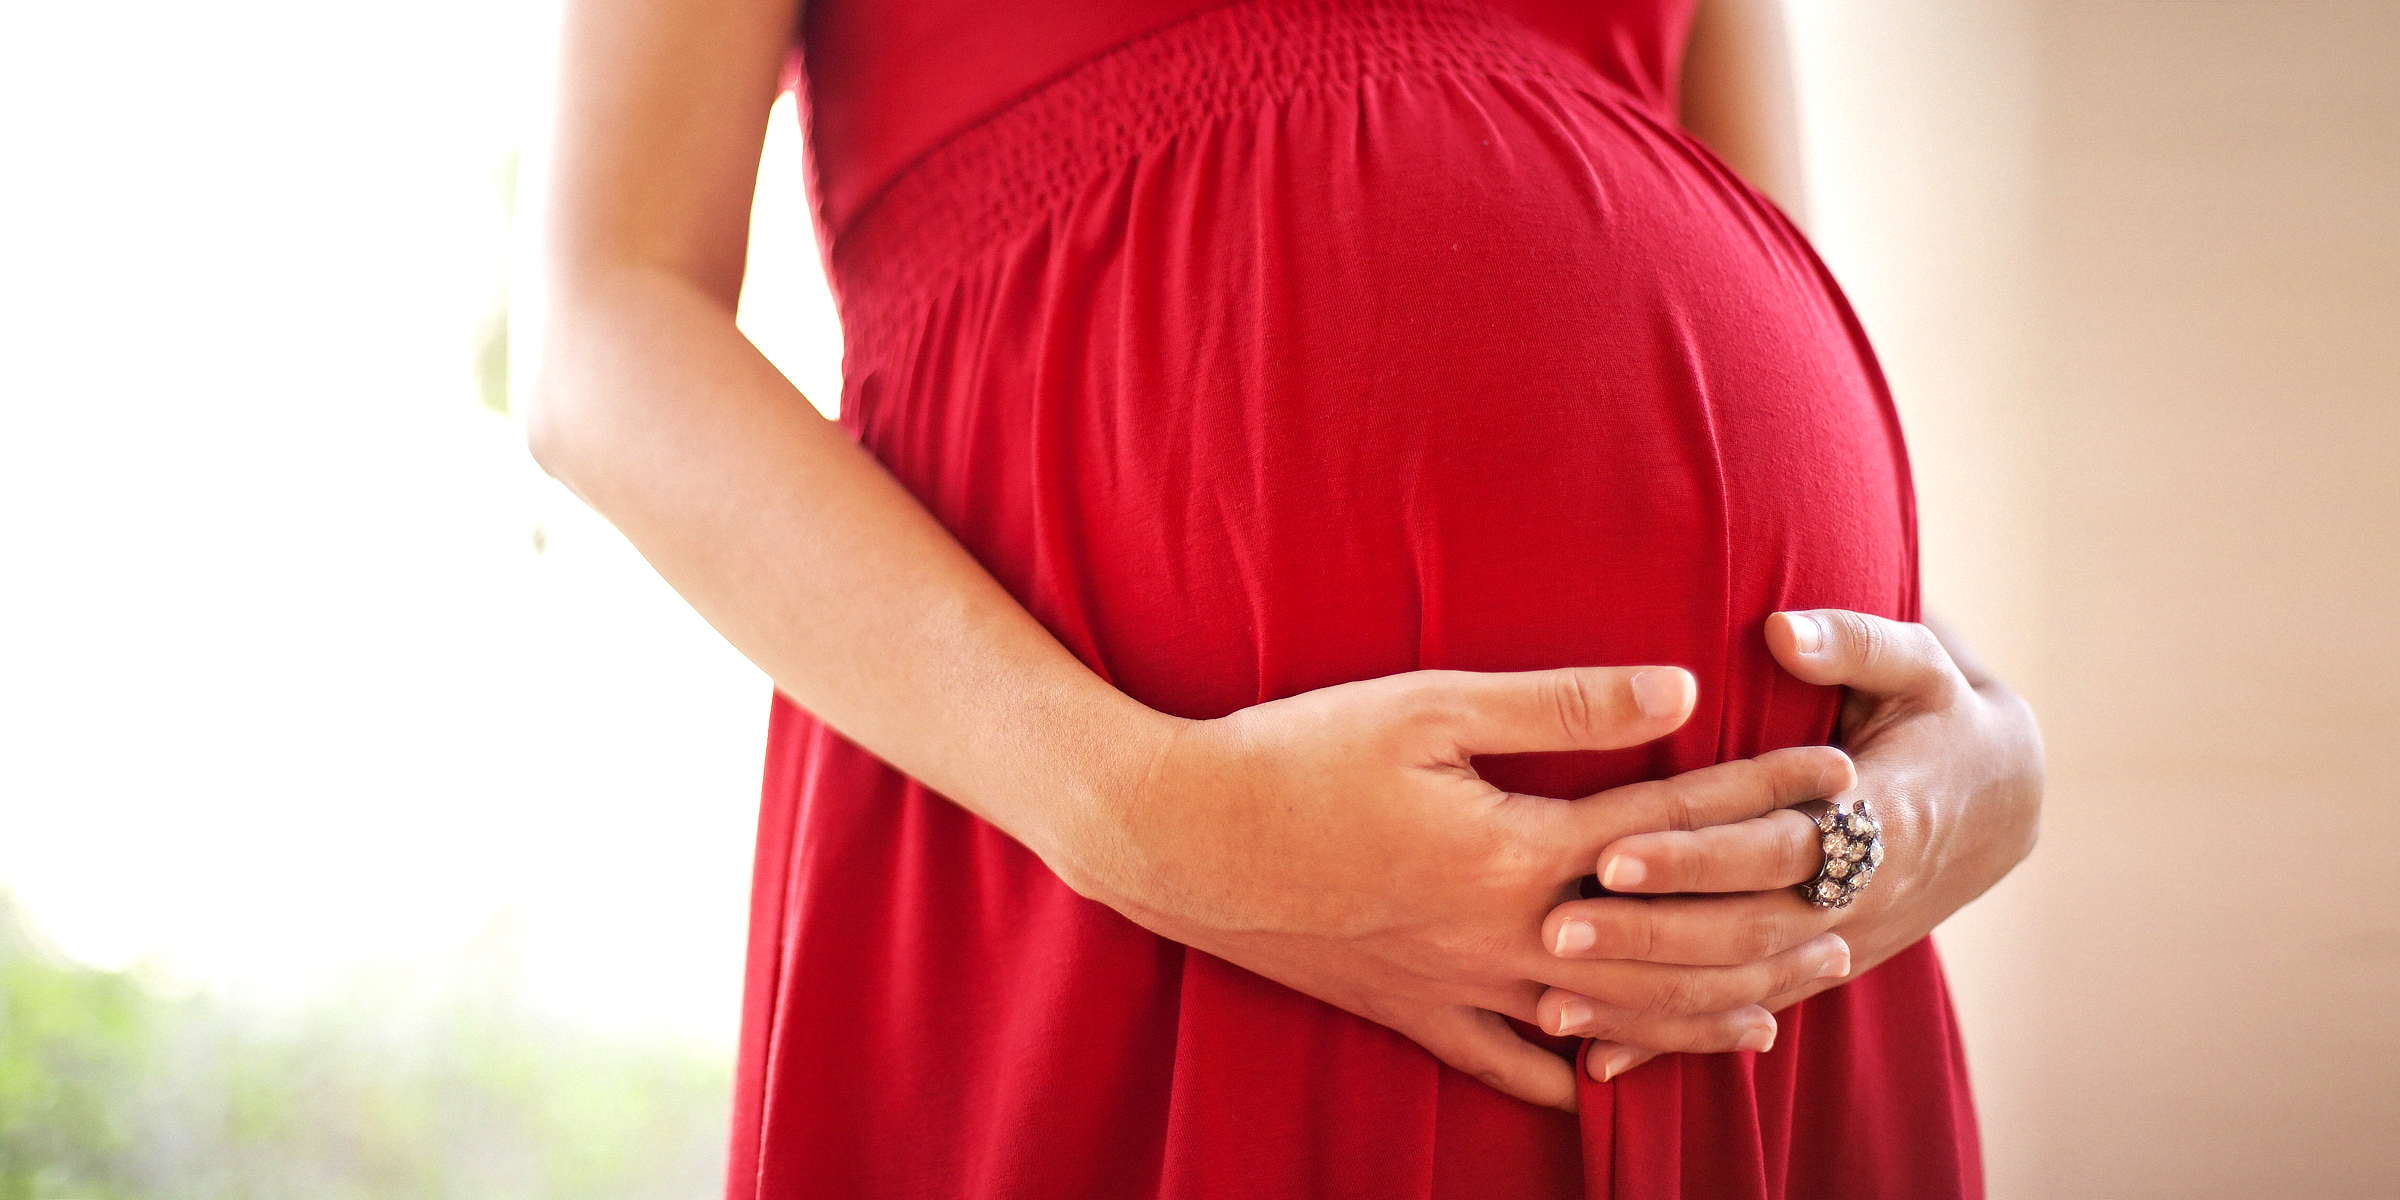 Pregnant woman holding her stomach | Source: Shutterstock